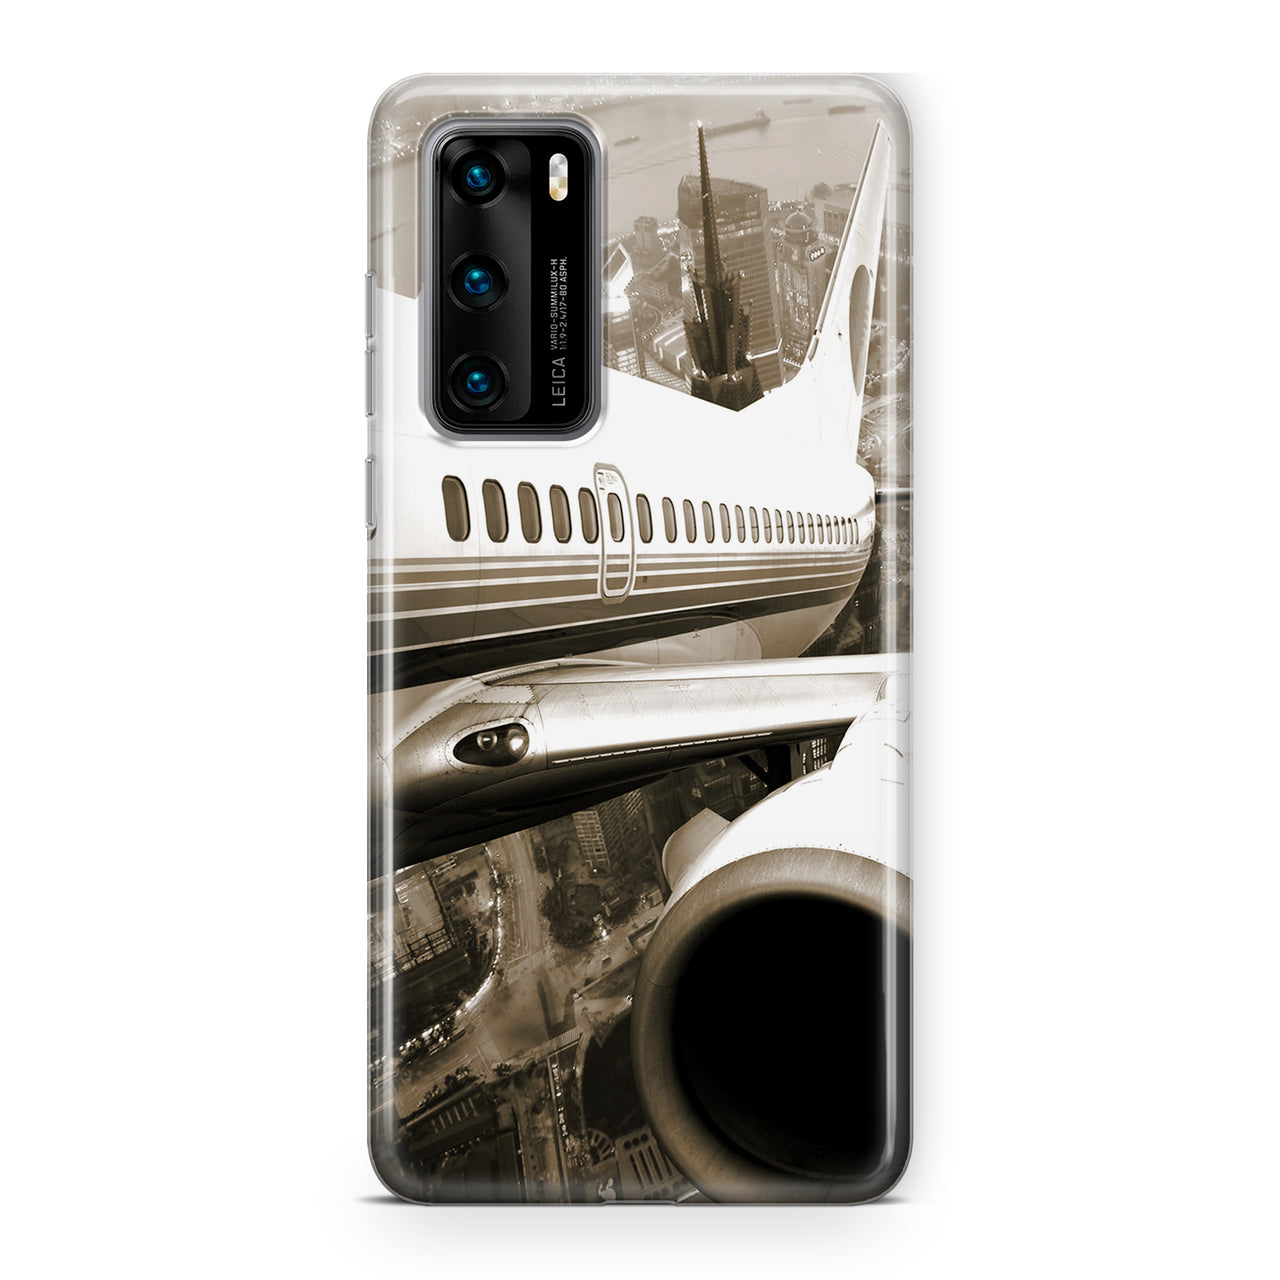 Departing Aircraft & City Scene behind Designed Huawei Cases